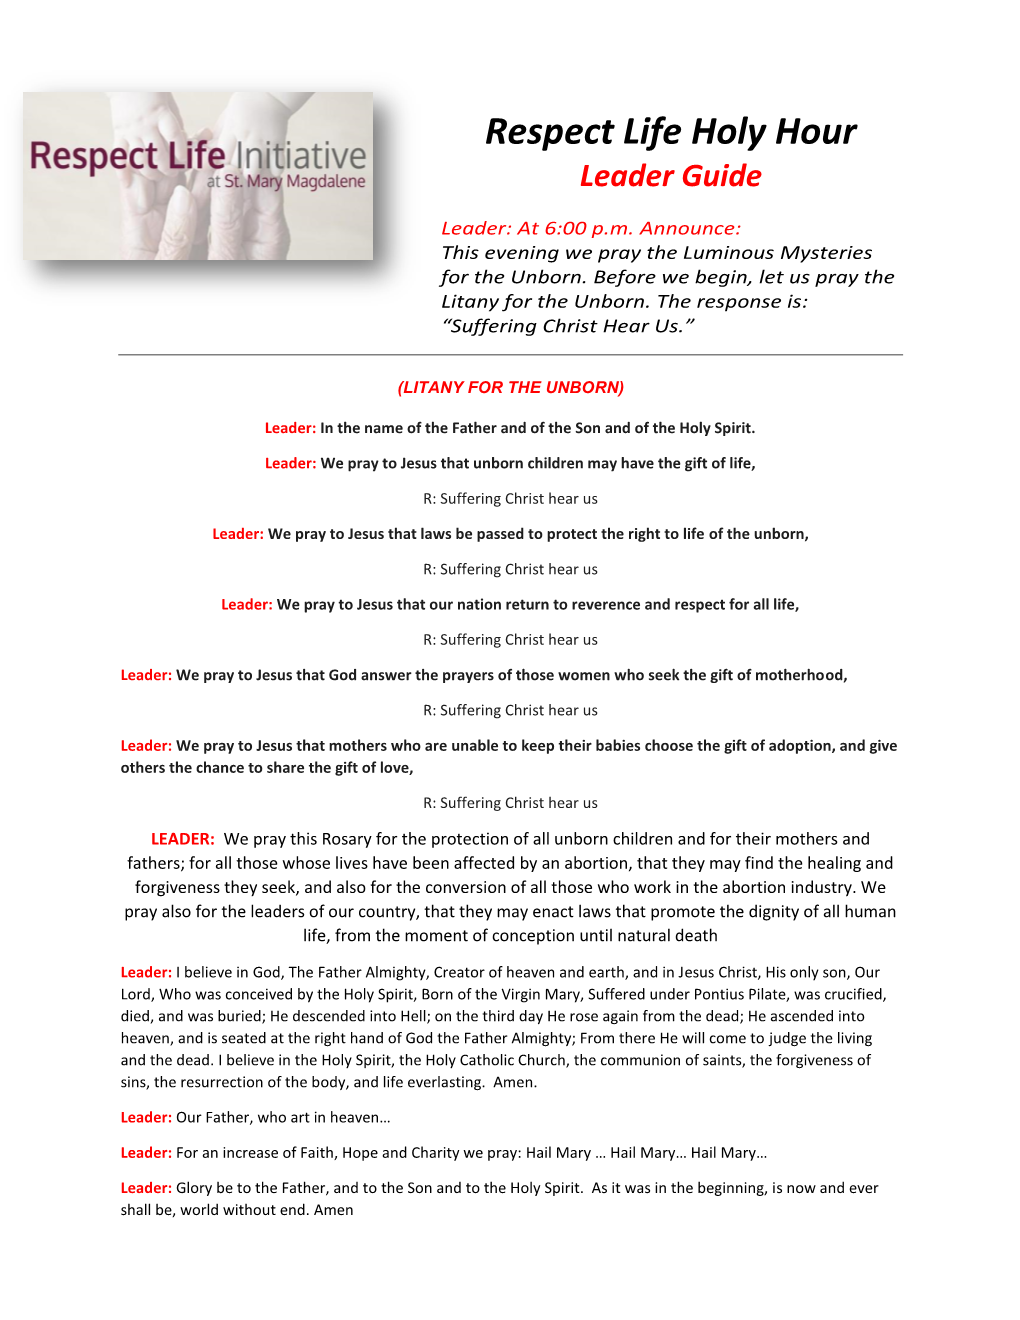 Respect Life Holy Hour Leader Guide